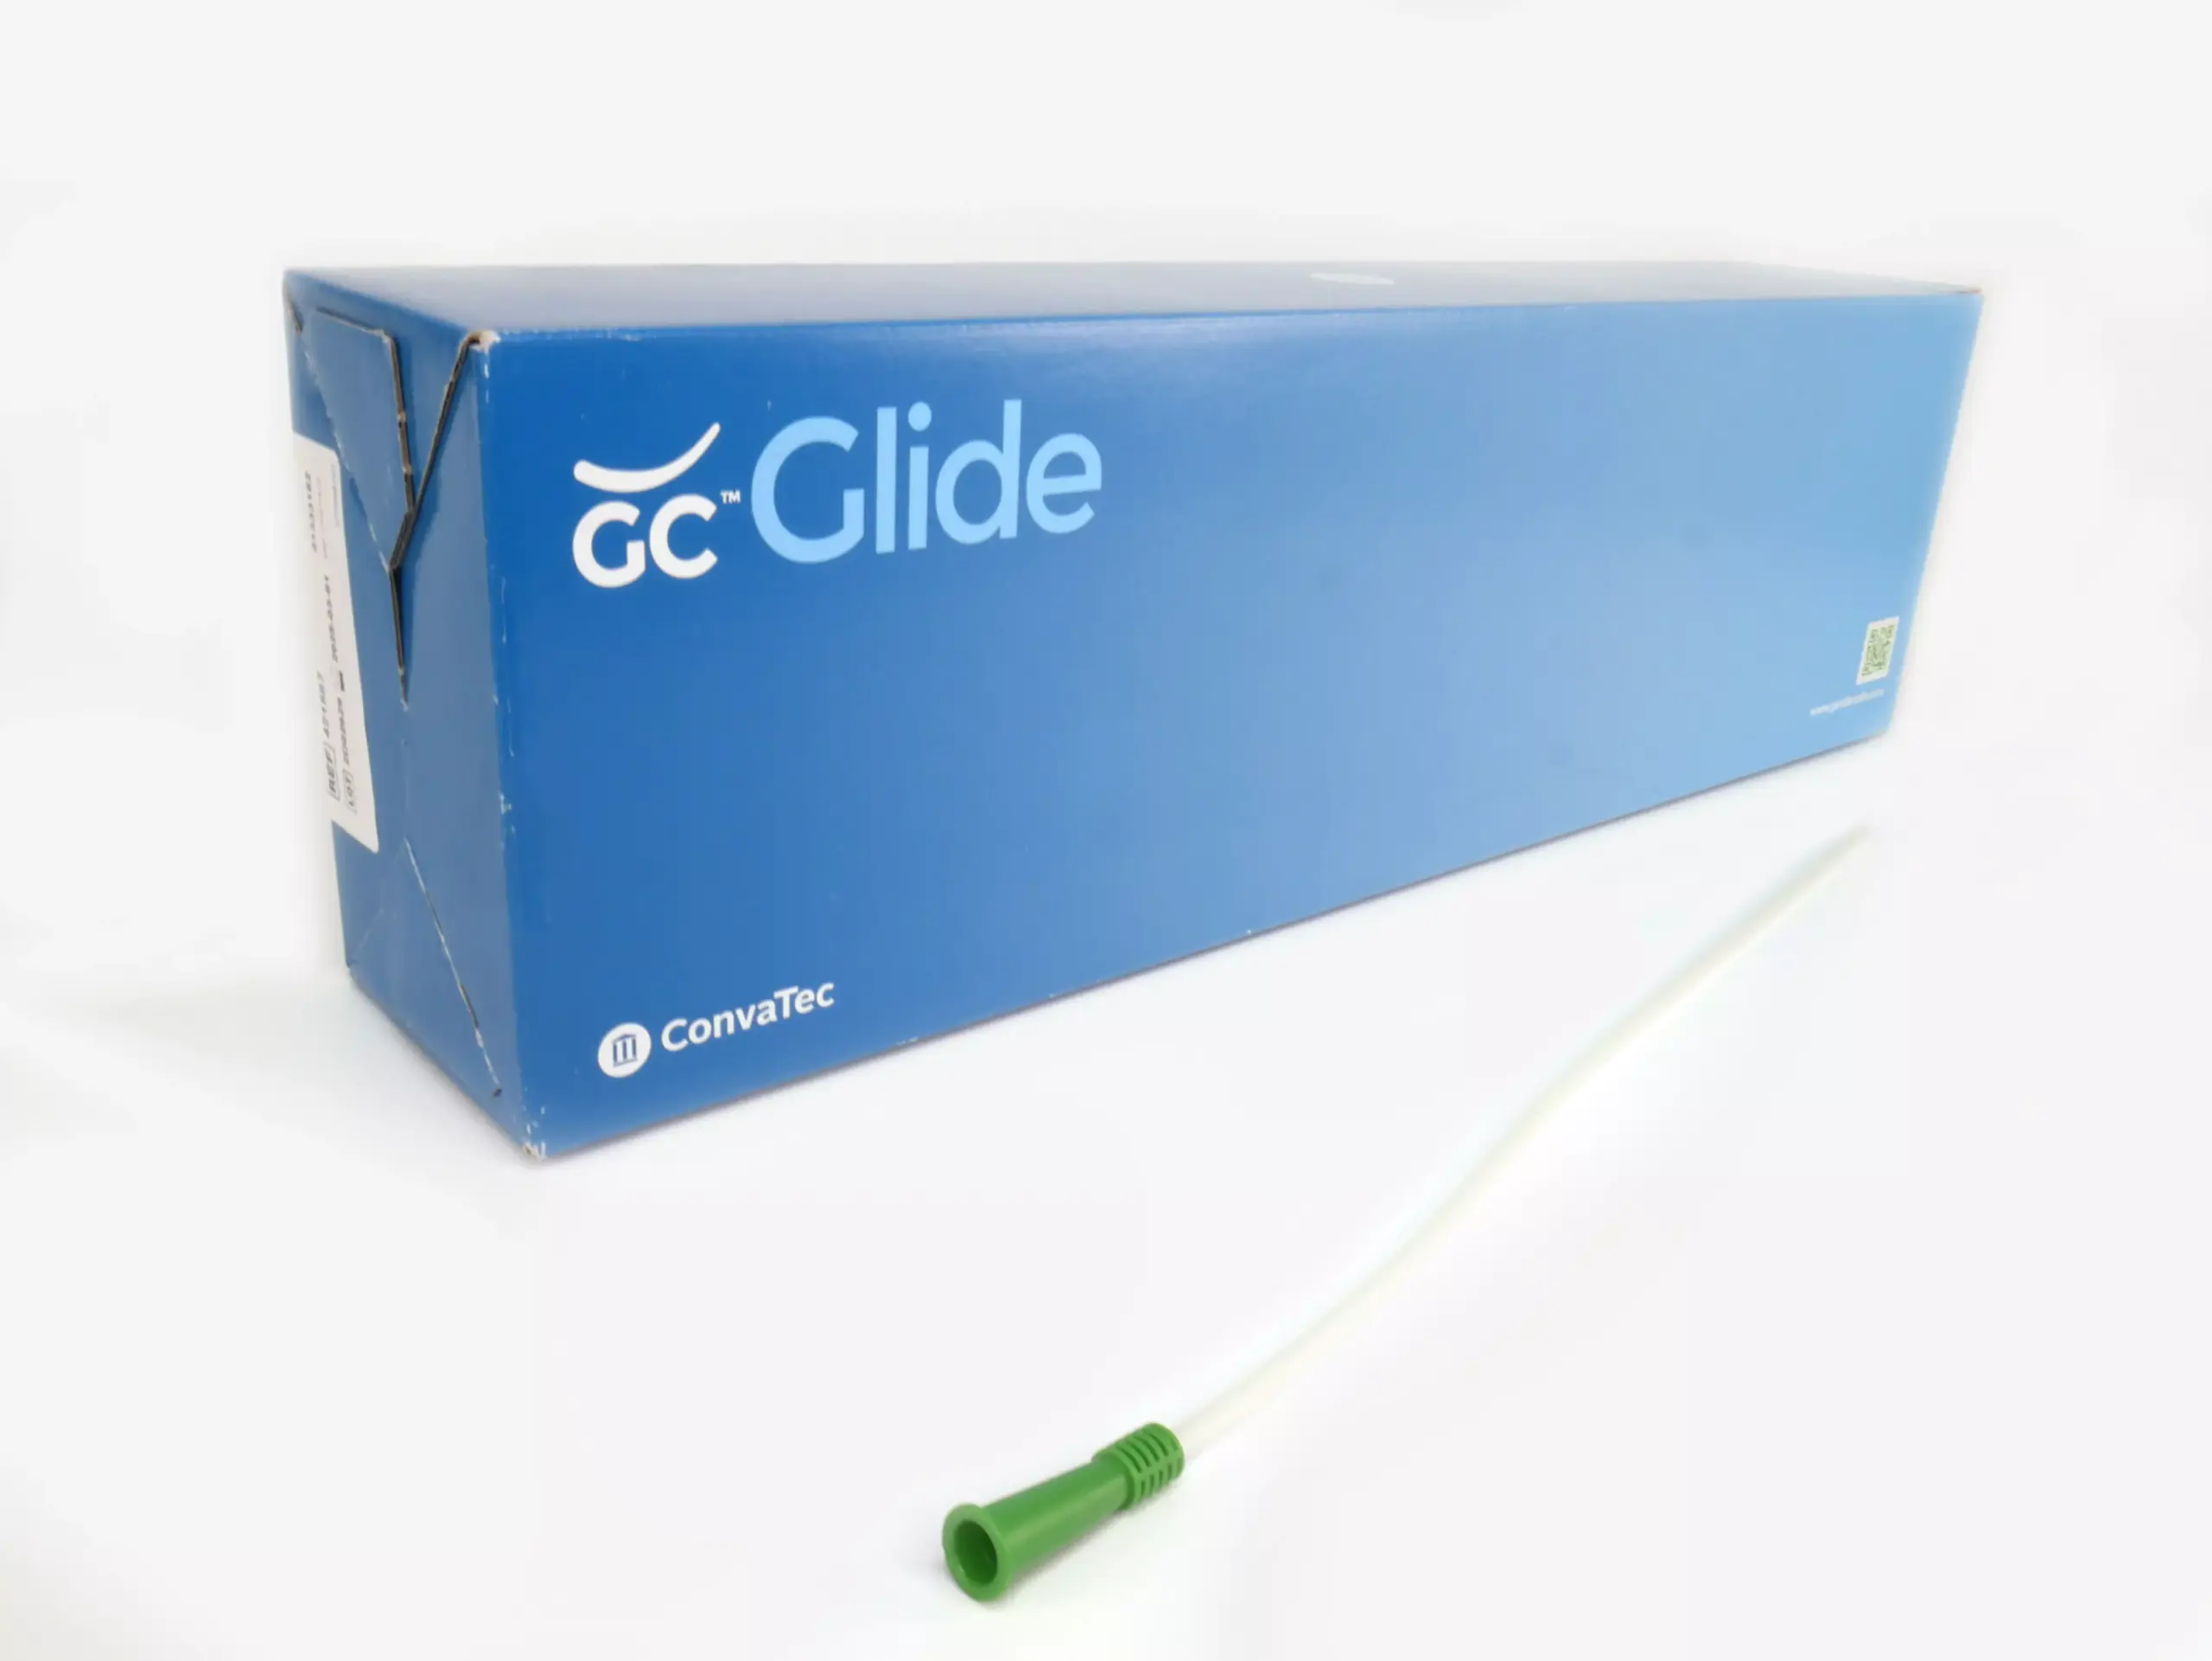 An image featuring a white background with a box of 30 GentleCath Glide catheters from RA Fischer. Positioned in front of the box is one of the catheters with an green gripper. The box prominently displays "GC Glide," "Convatec," "www.gentlecath.com," and includes a QR code.